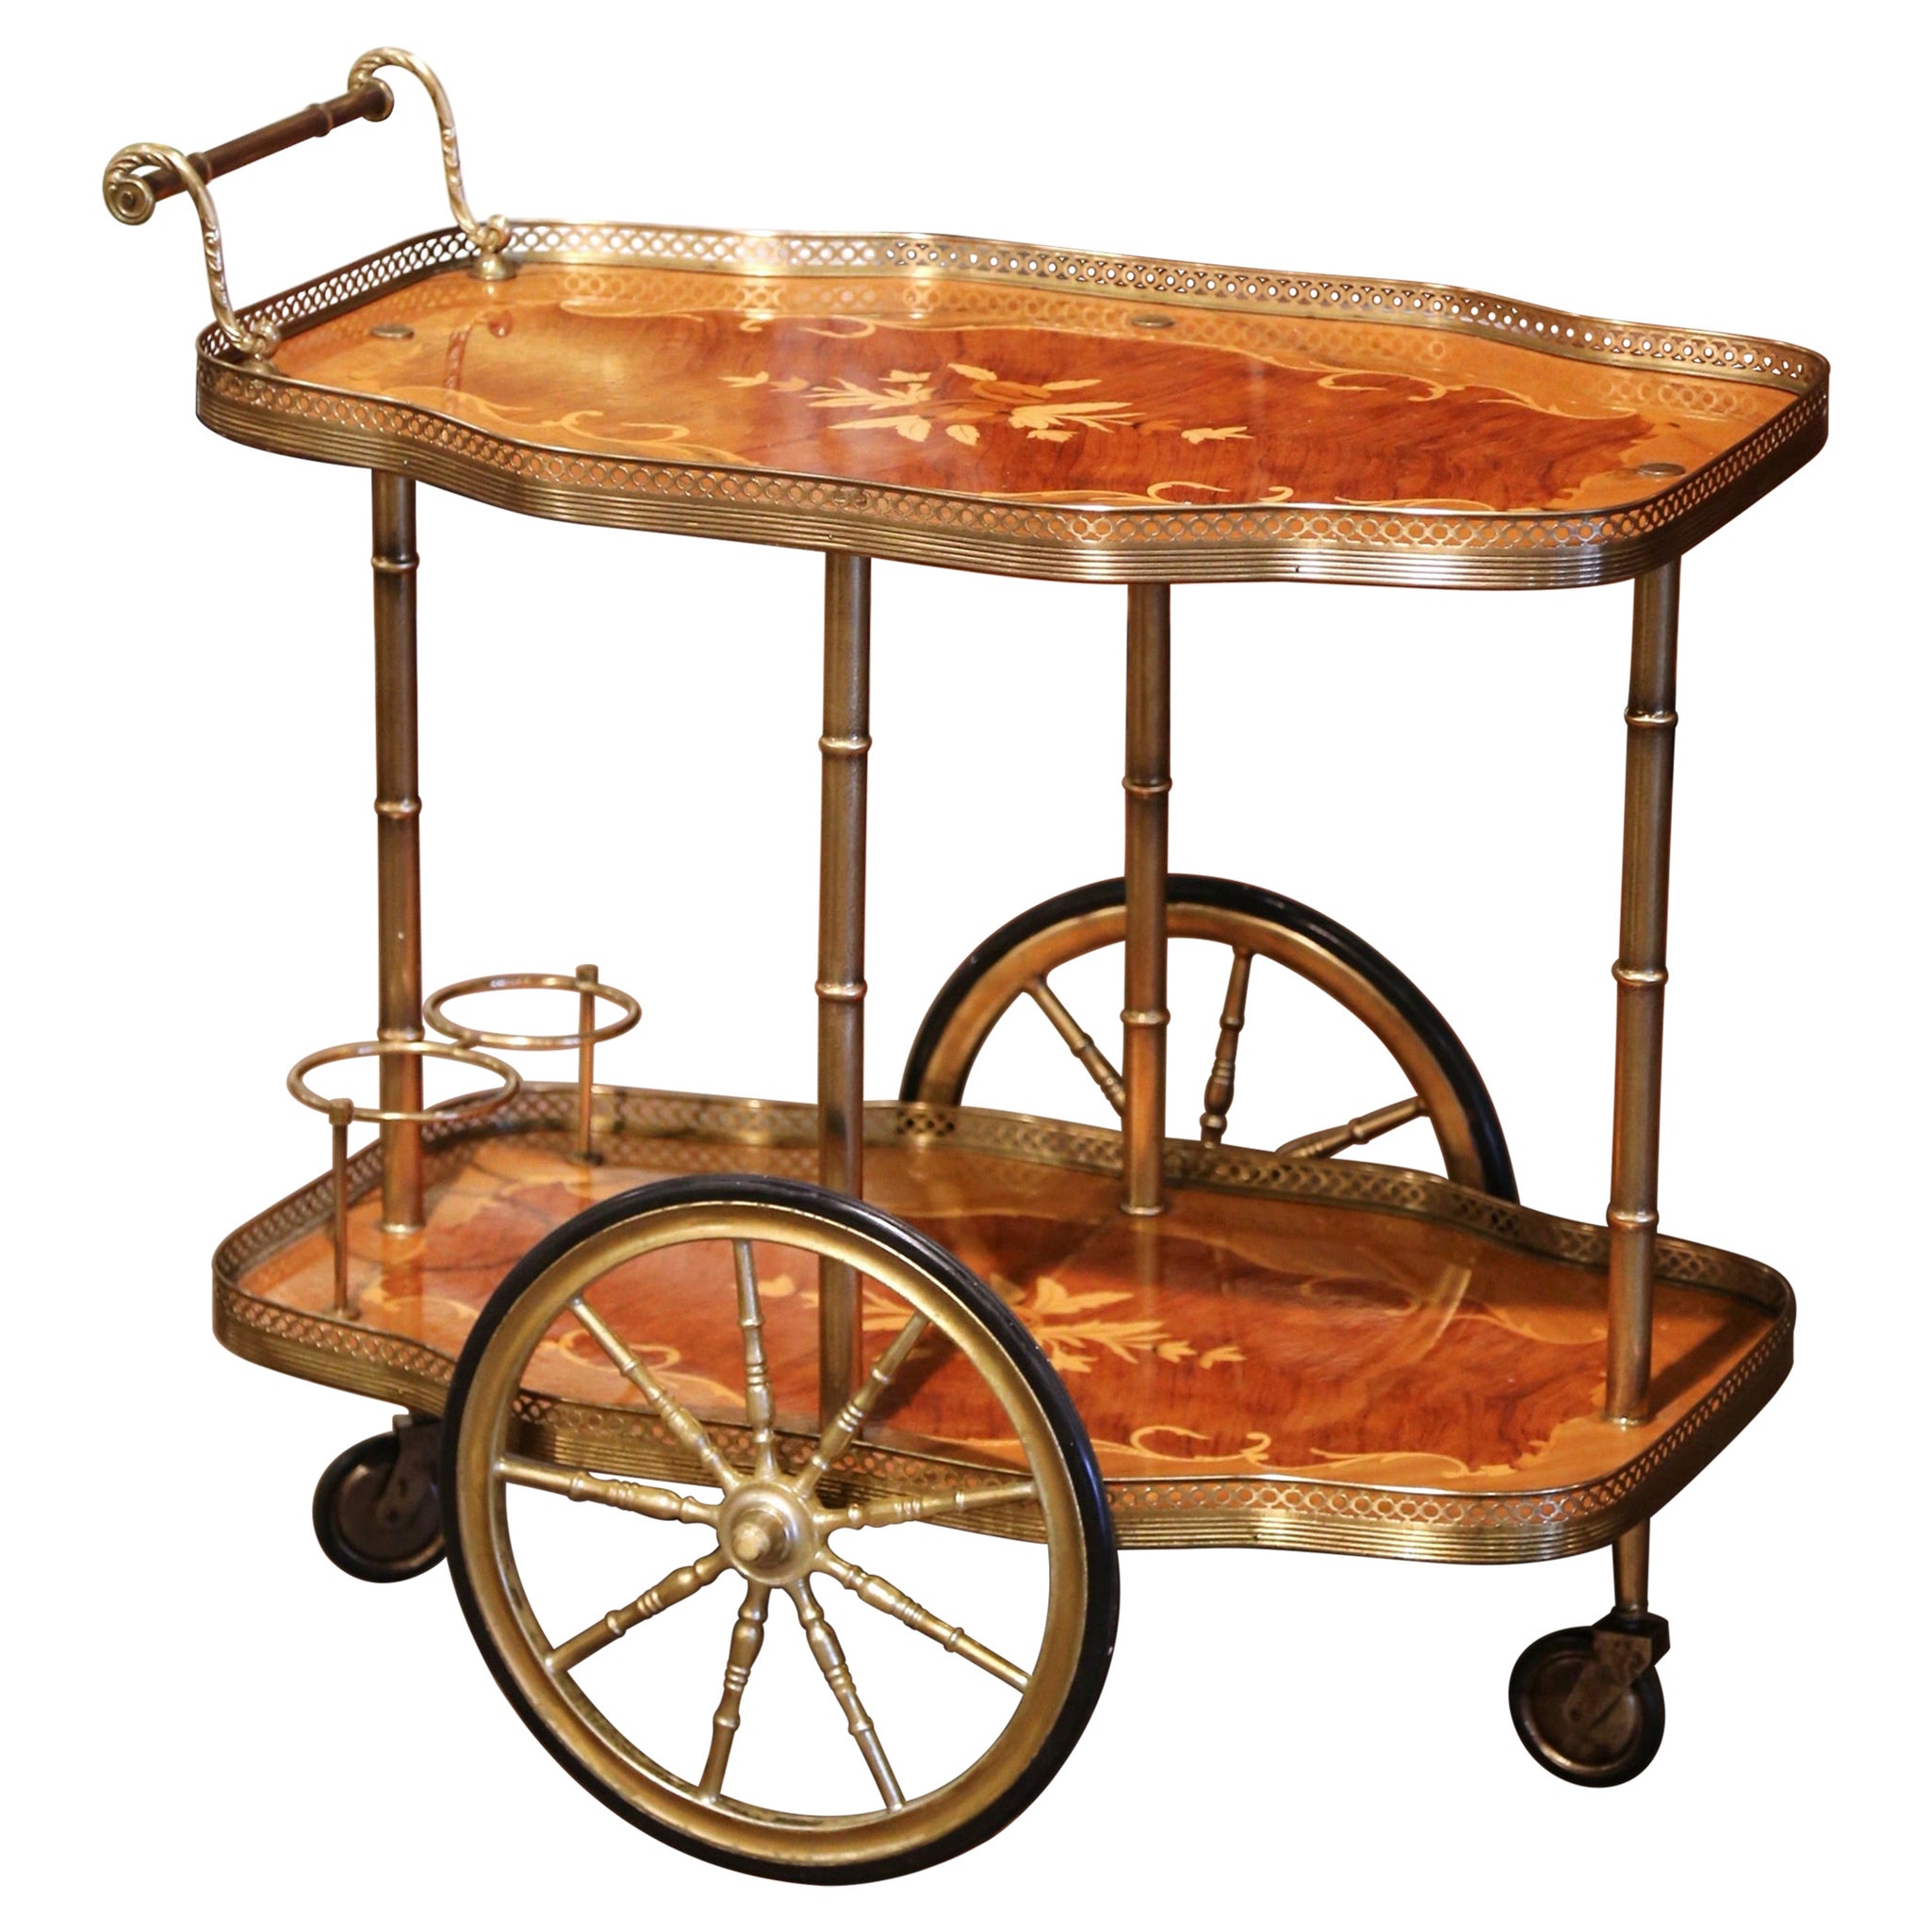 Mid-20th Century French Rosewood and Brass Tea Cart with Marquetry Inlaid Motifs